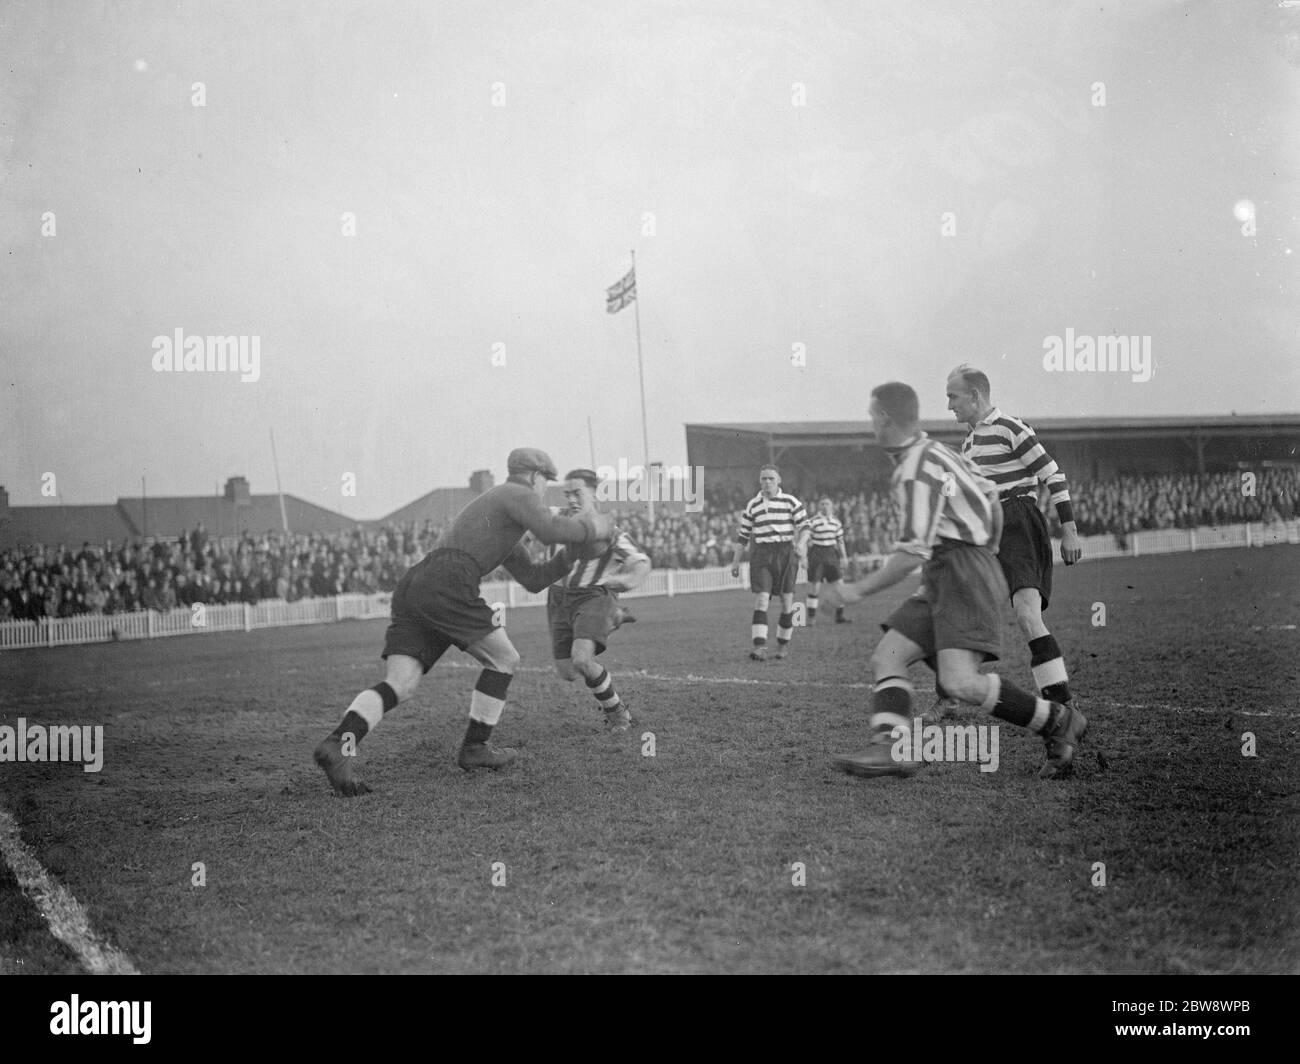 Dartford versus Darlington football match . Action in front of the goal , the goalkeeper makes a save . 1937 Stock Photo